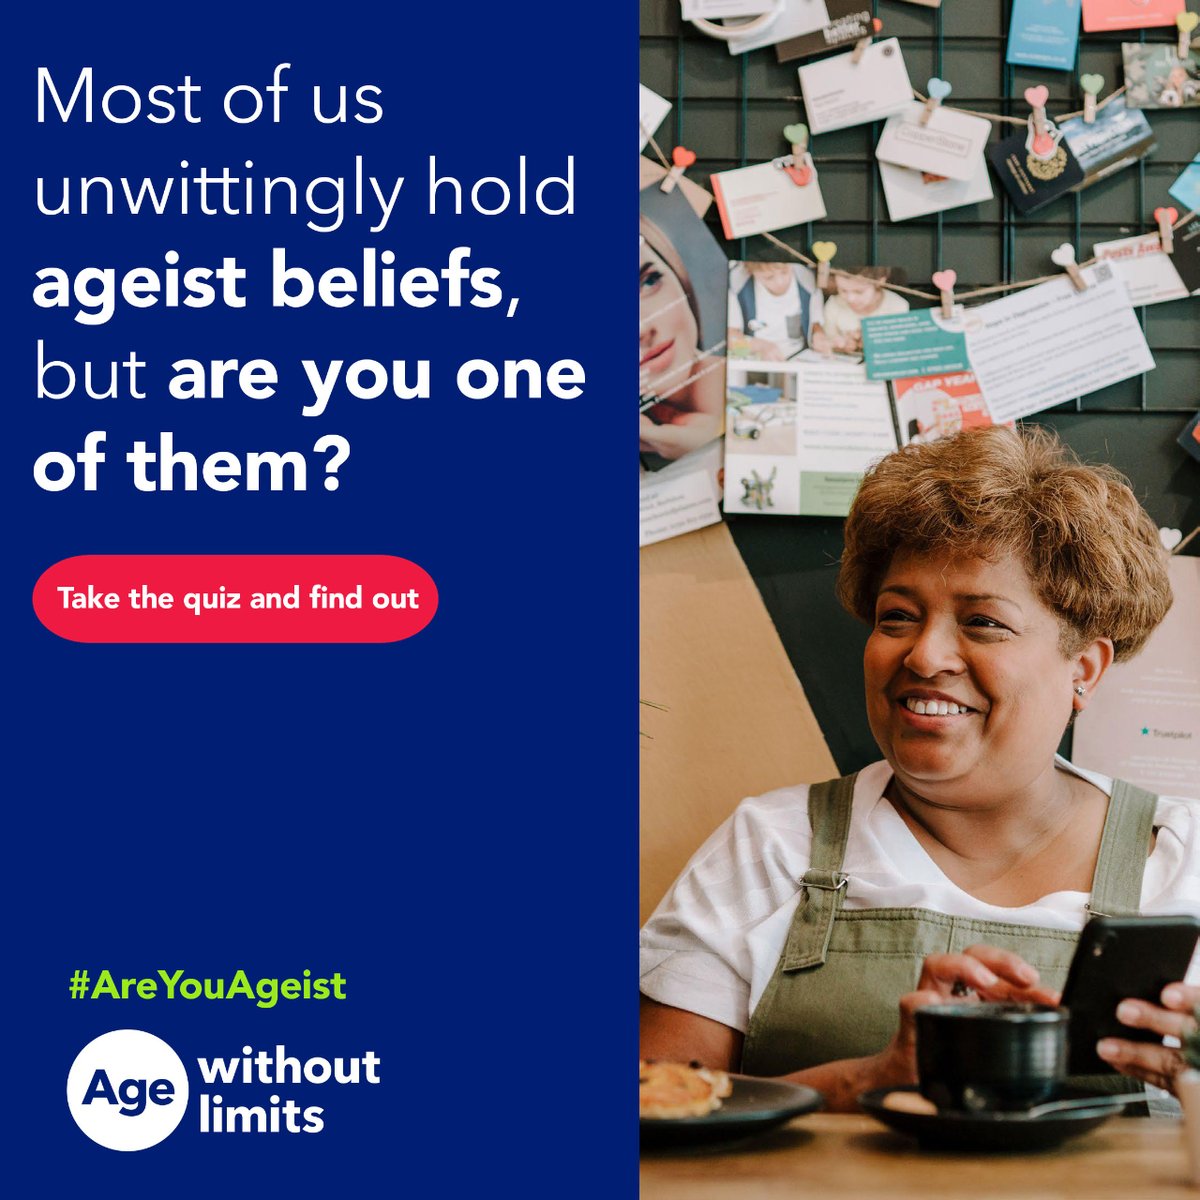 We are proud to be an Age Friendly Employer and to support the current Age Without Limits campaign from Ageing Better. 

i.mtr.cool/dlbkkpcmwa

#AgeWithoutLimits #AreYouAgeist #Ageism #OlderPeople #AgeFriendlyEmployer